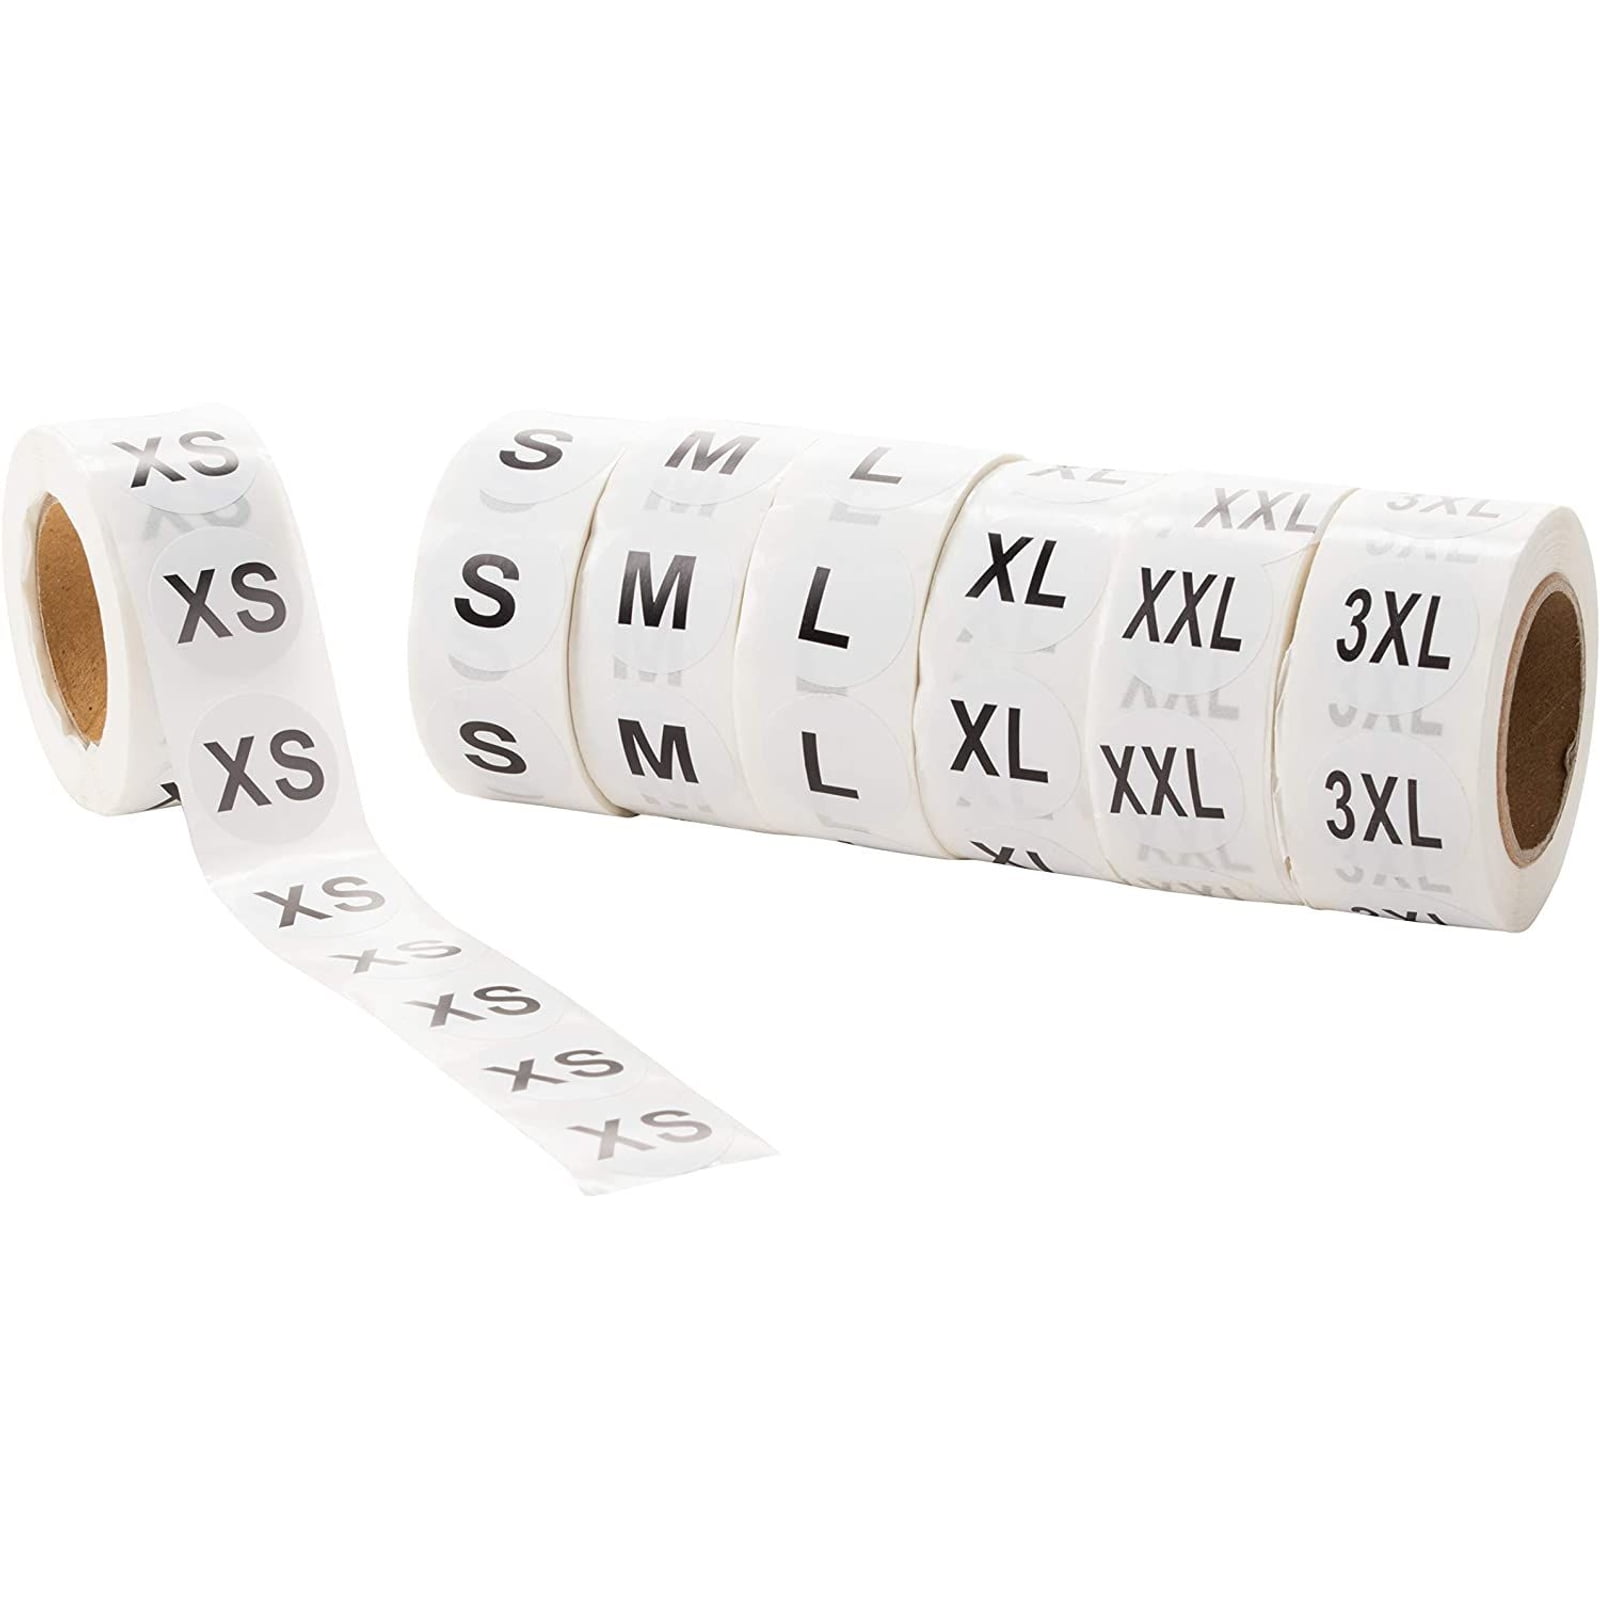 Wrap Around Clothing Size Label Kit Sizes "S-XXL" Supply your Store by Size 